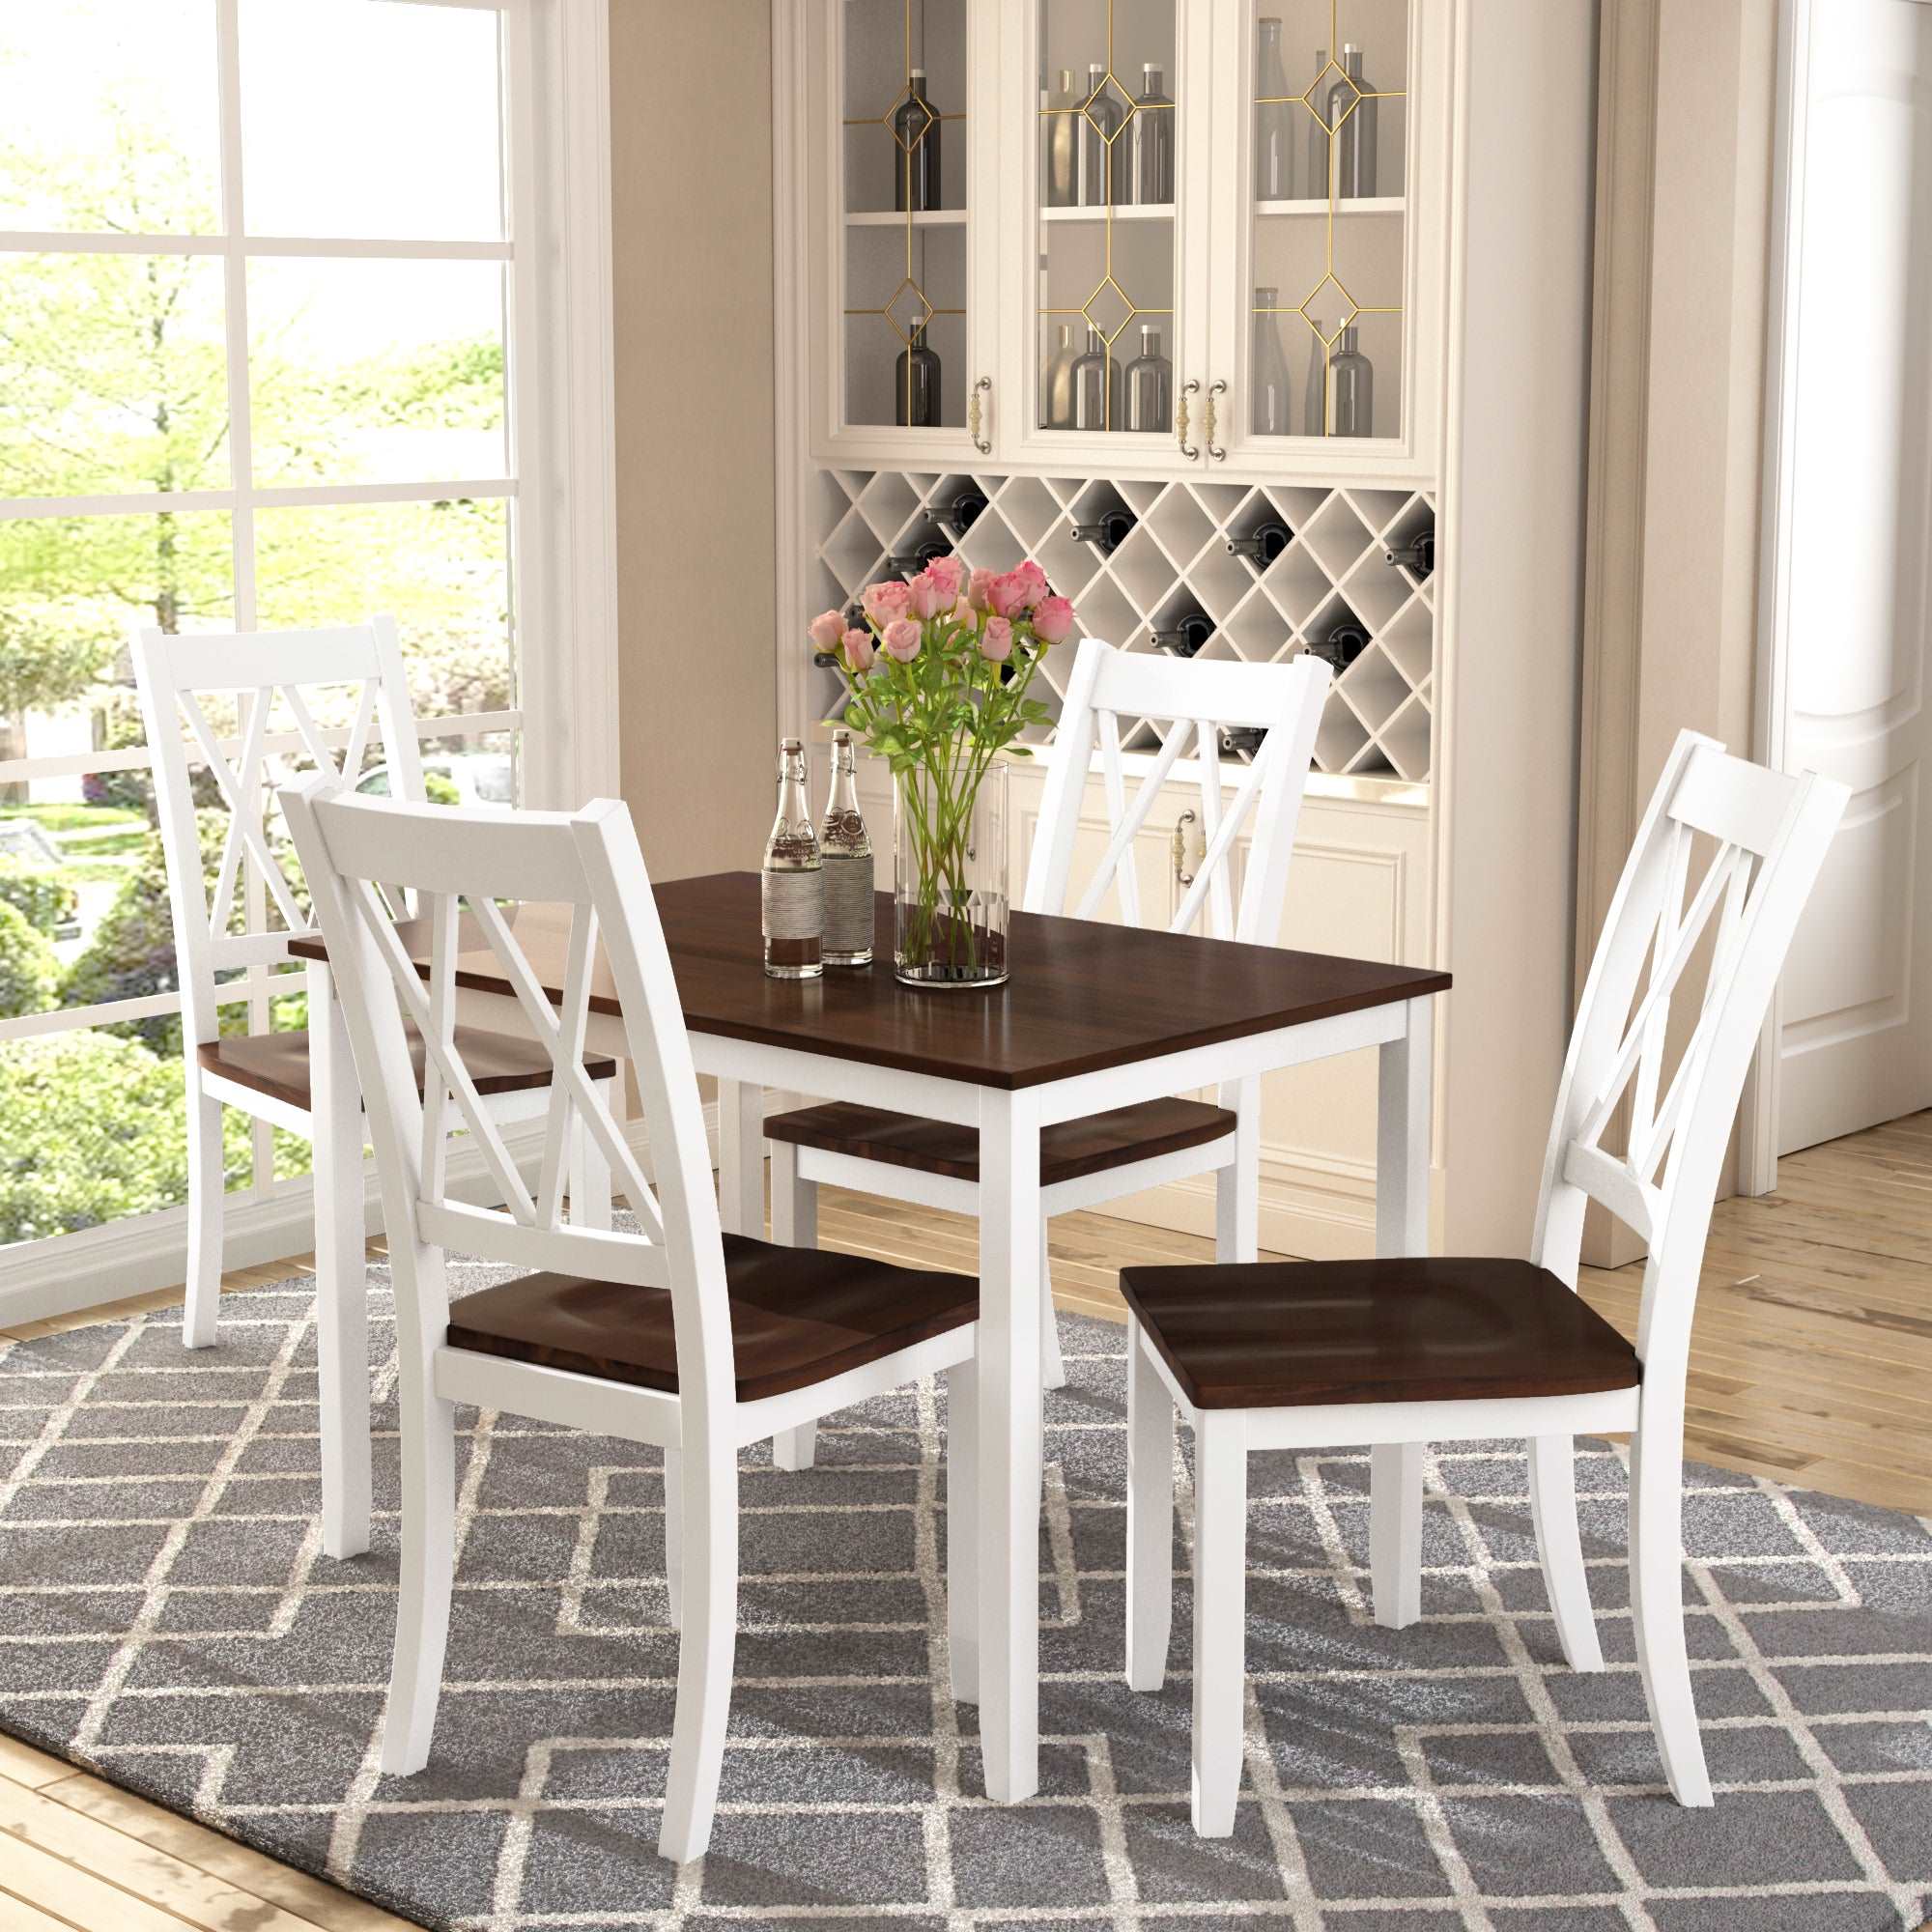 Bellemave 5-Piece Dining Table Set Home Kitchen Table and Chairs Wood Dining Set